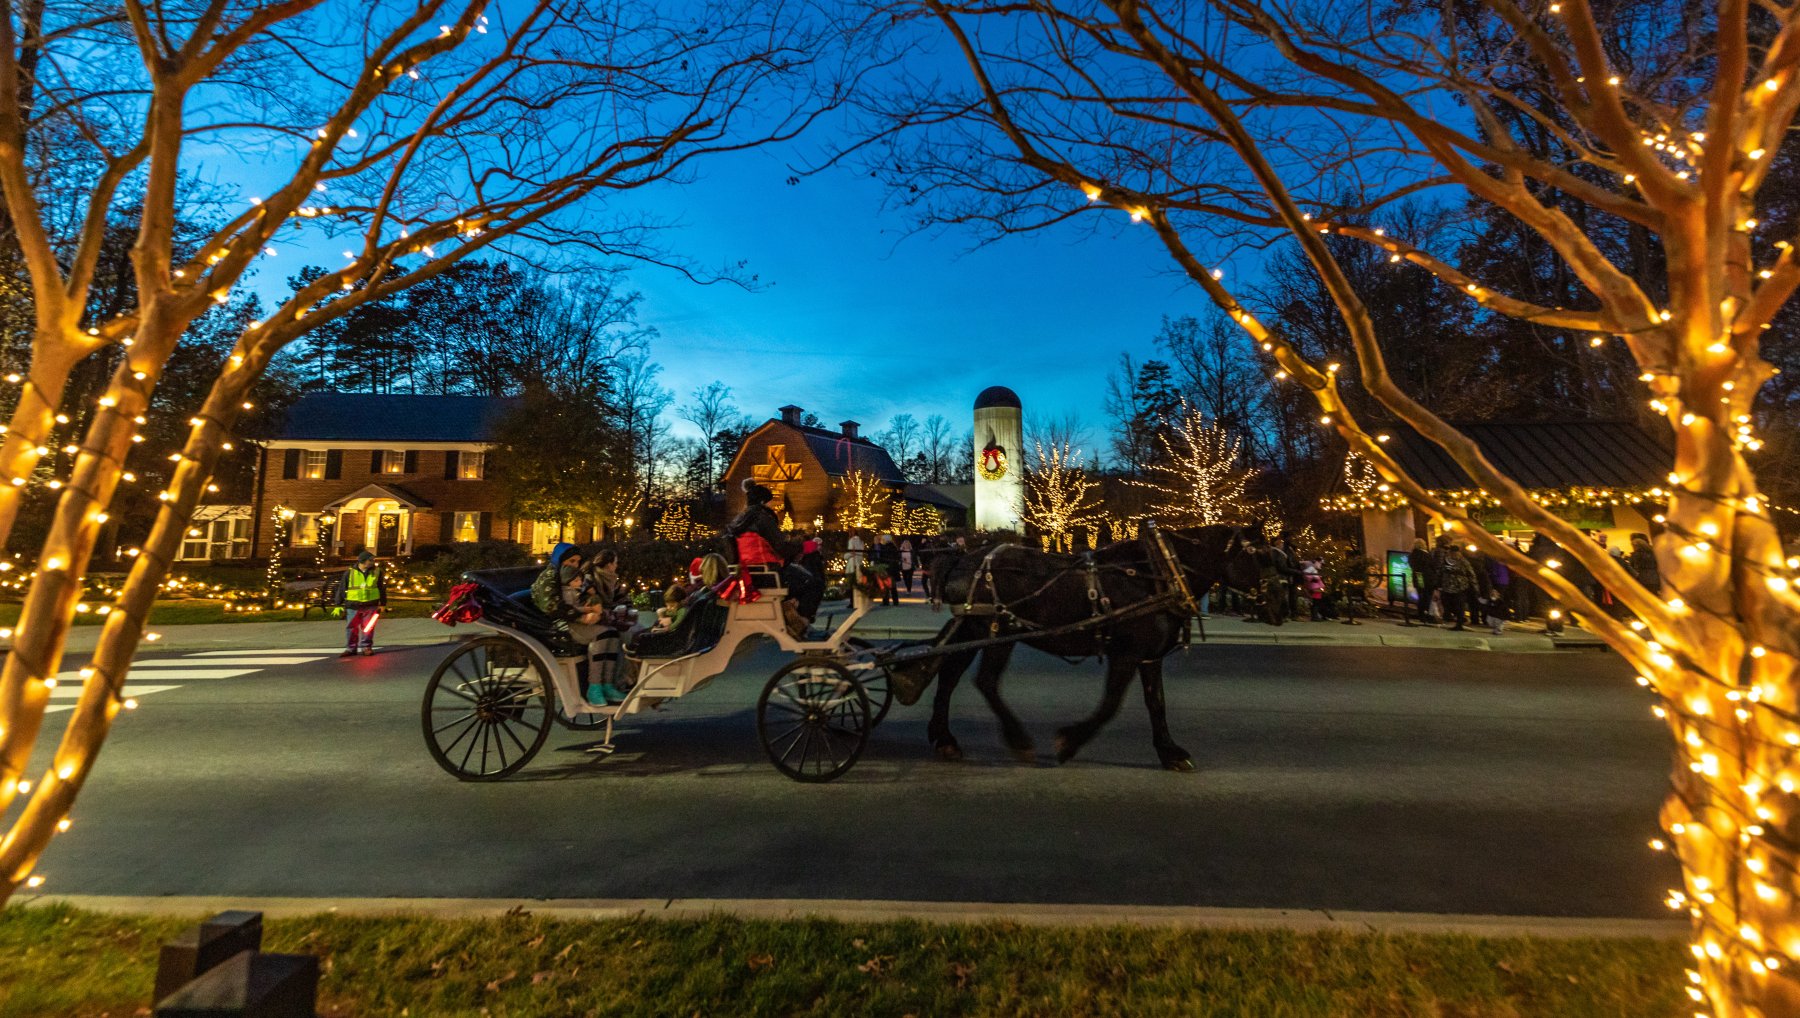 Horse-drawn carriage in road in front of lit-up library at night during Christmas